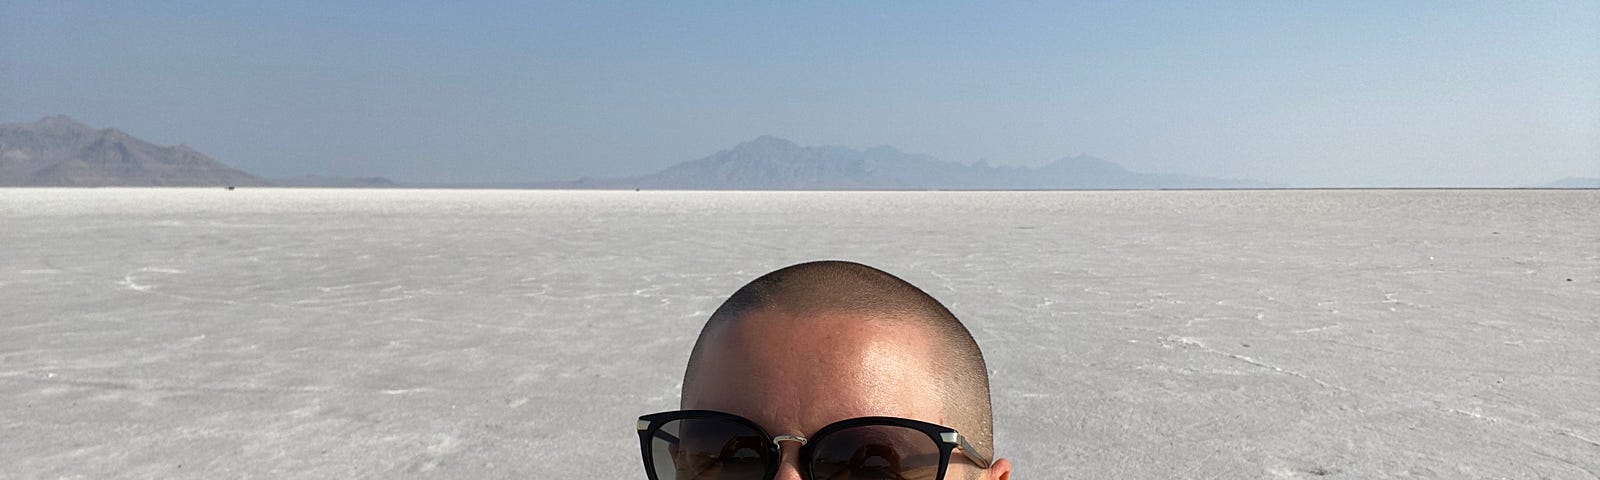 Sarah Dopp smiling with a large stretch of salt flats in the background. She is white, has shaved head, wearing sunglasses.